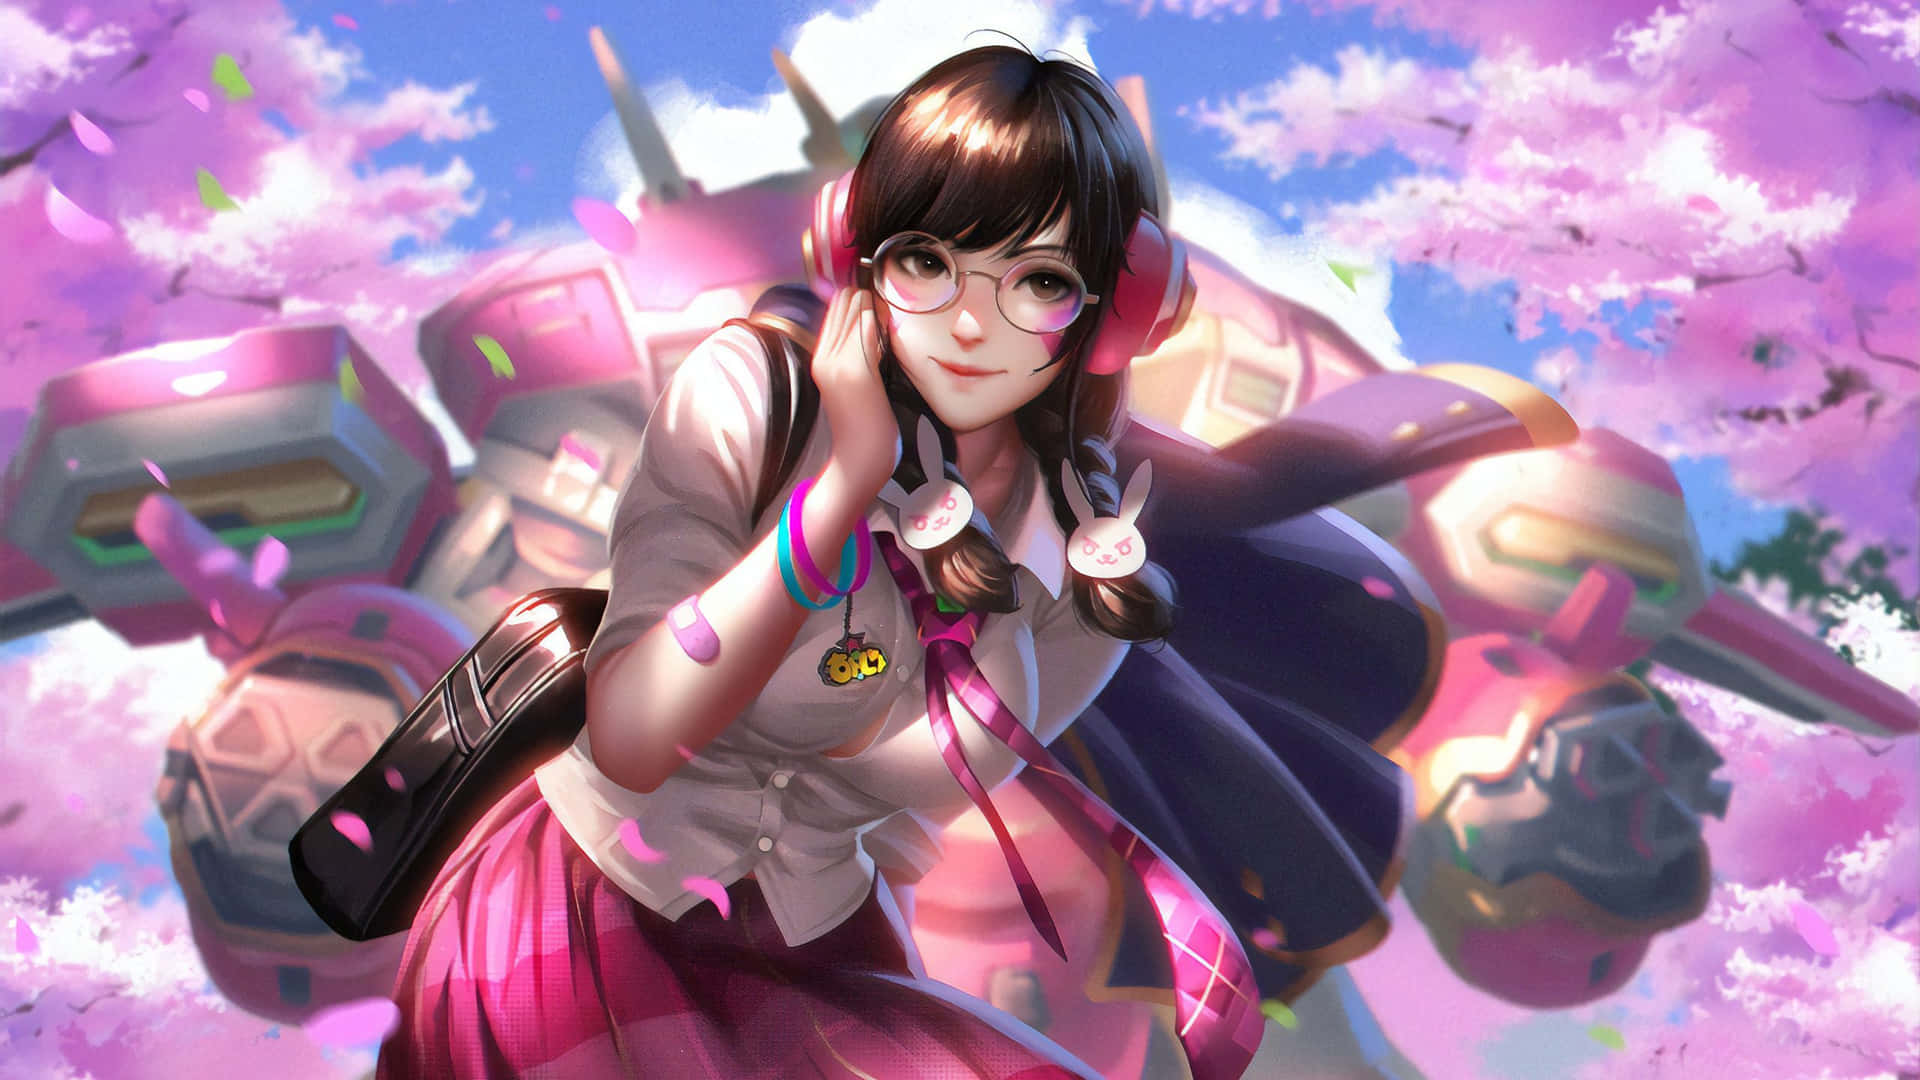 Overwatch D.va - The Competitive Gaming Champion Wallpaper